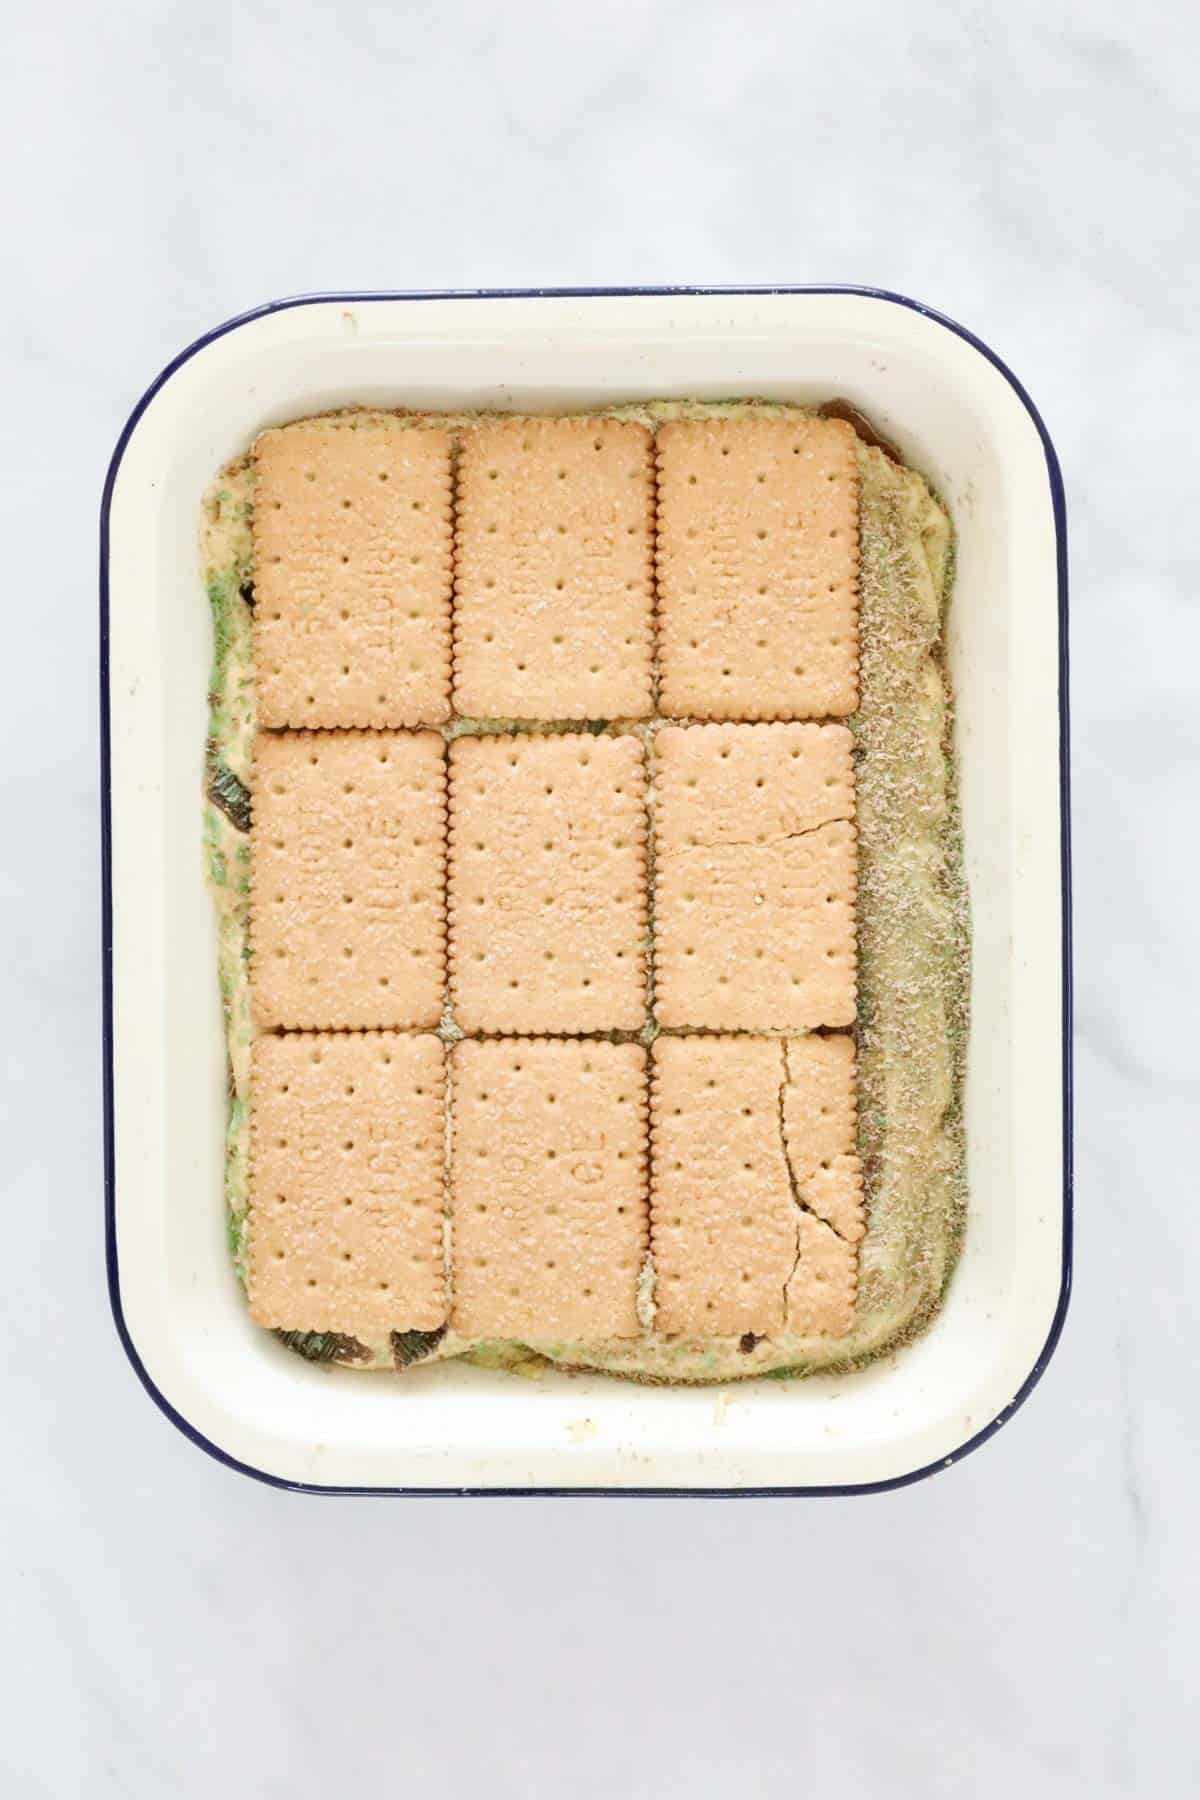 Biscuits layered on top of cream mixture in a baking dish.